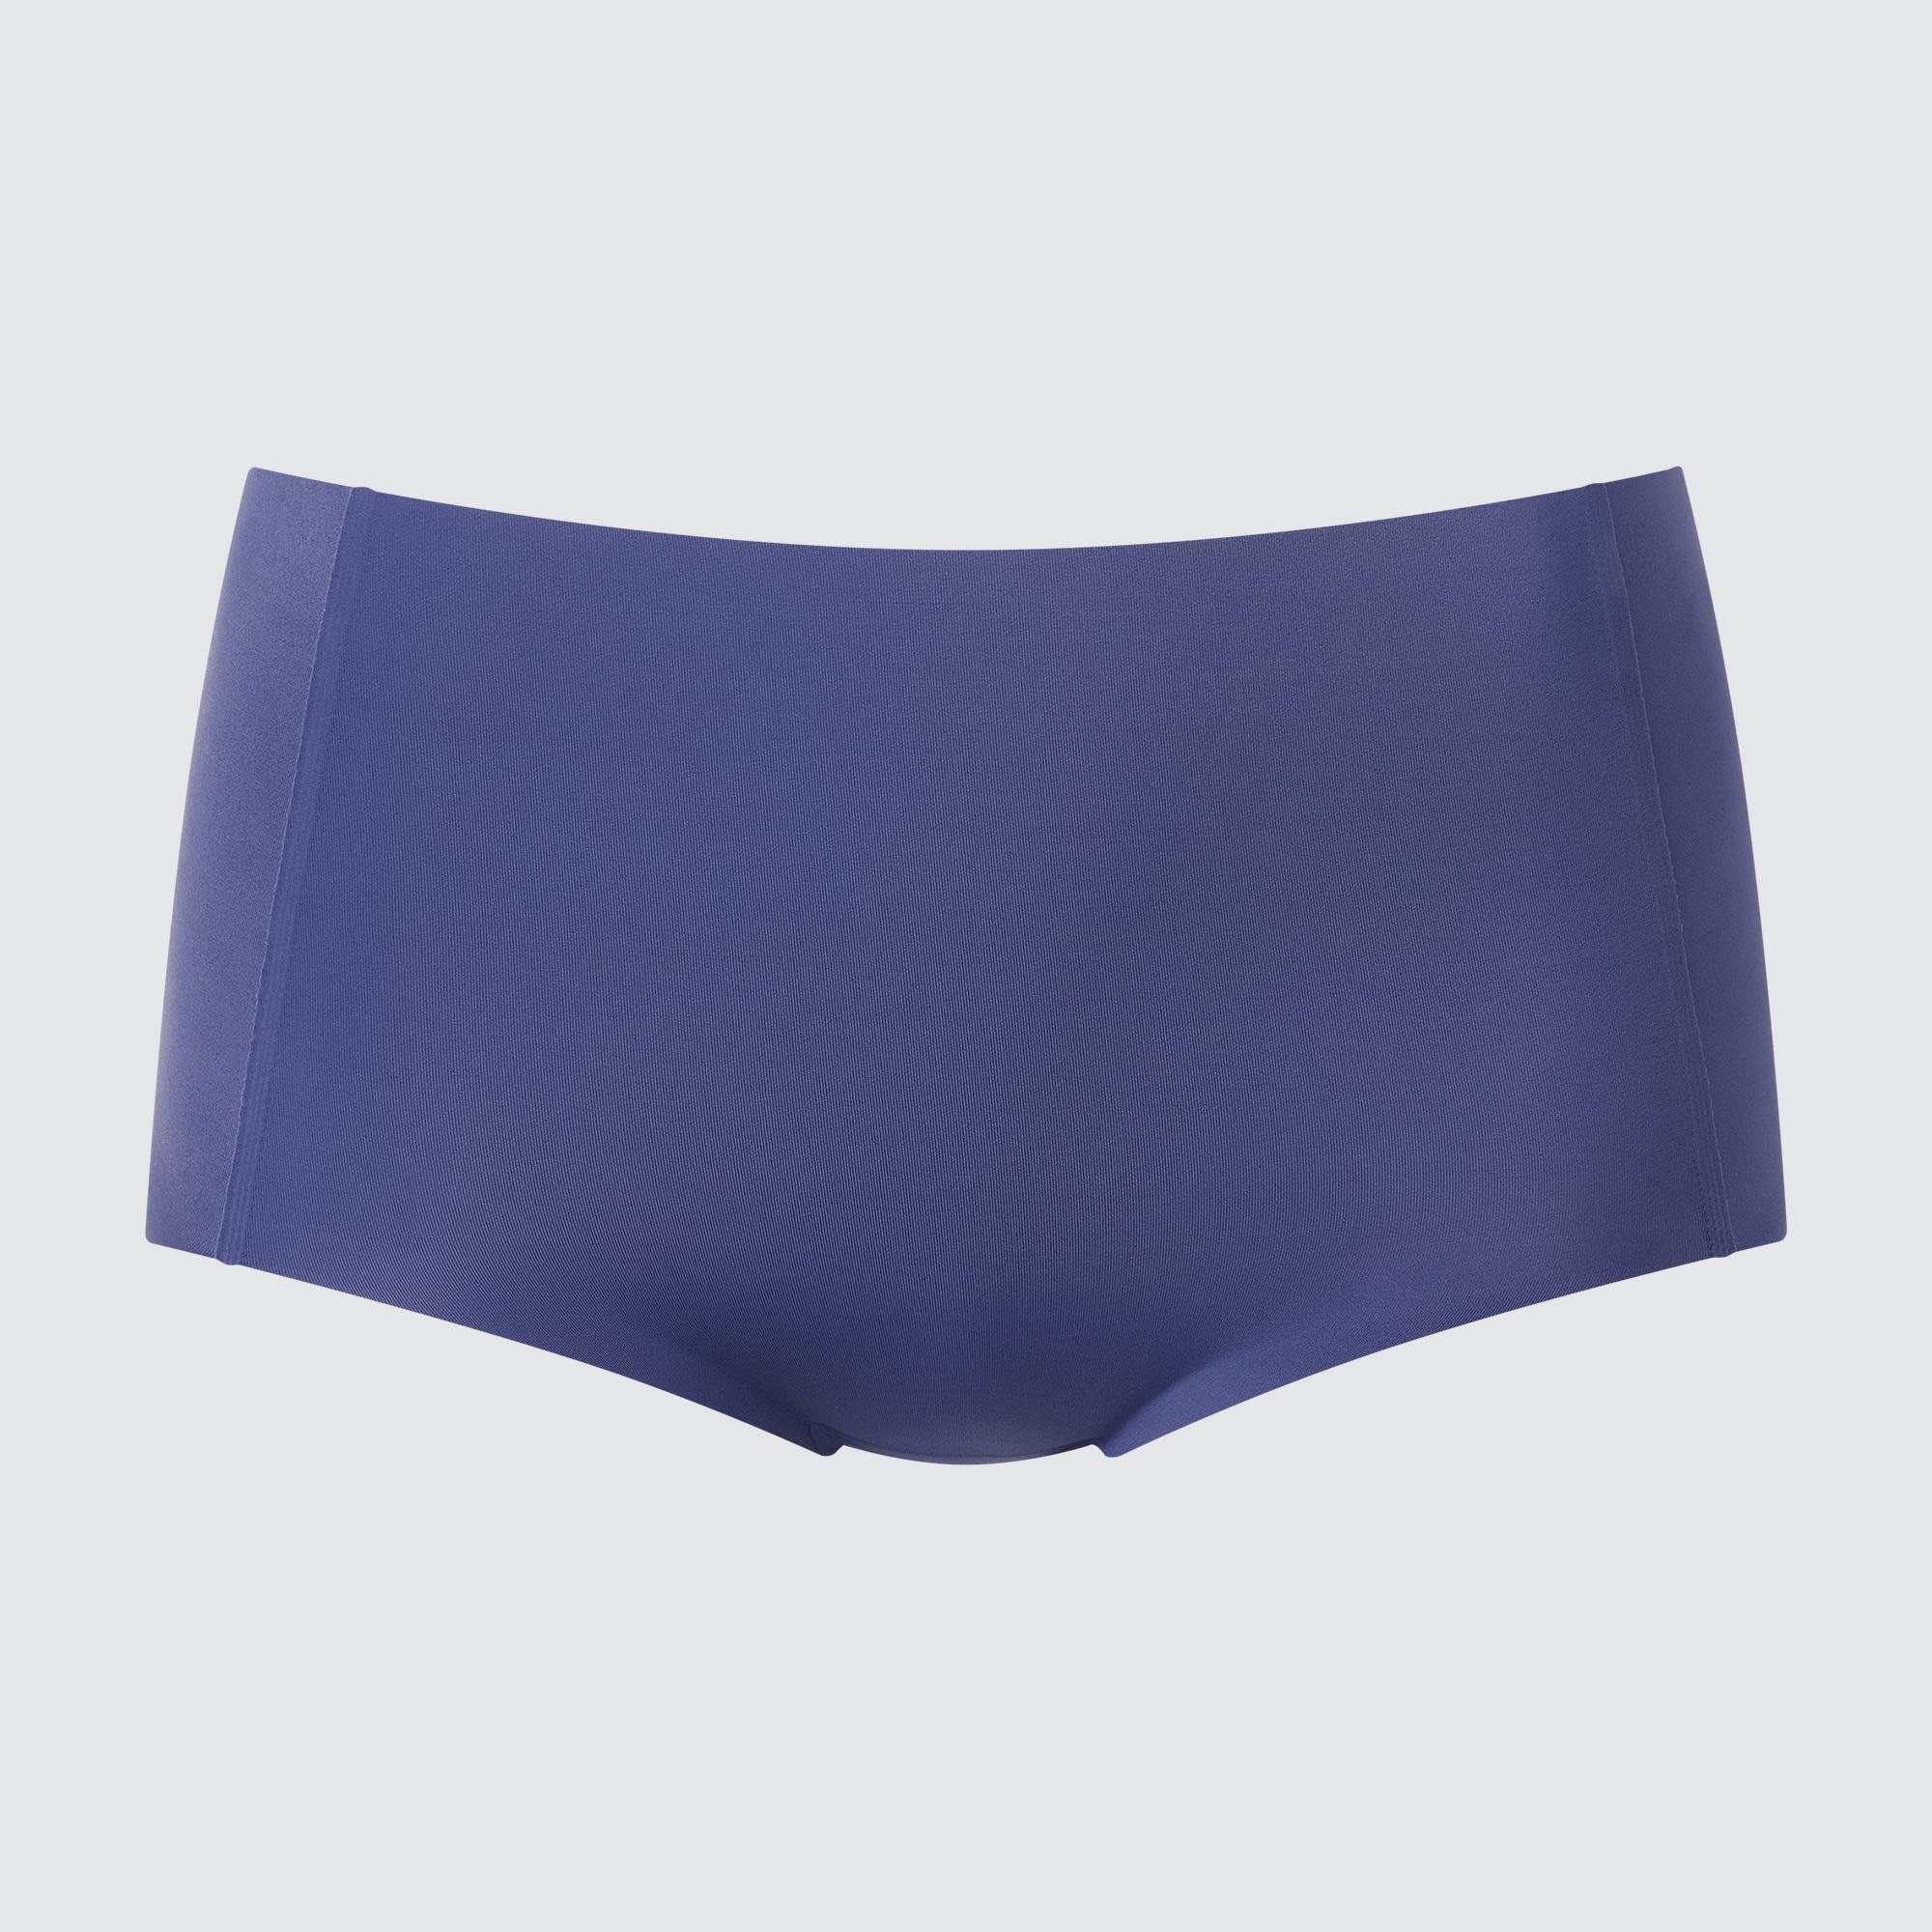 Uniqlo AIRism Innerwear Promises Comfort, Now @ Just $9.90 A Piece Limited  Time Offer